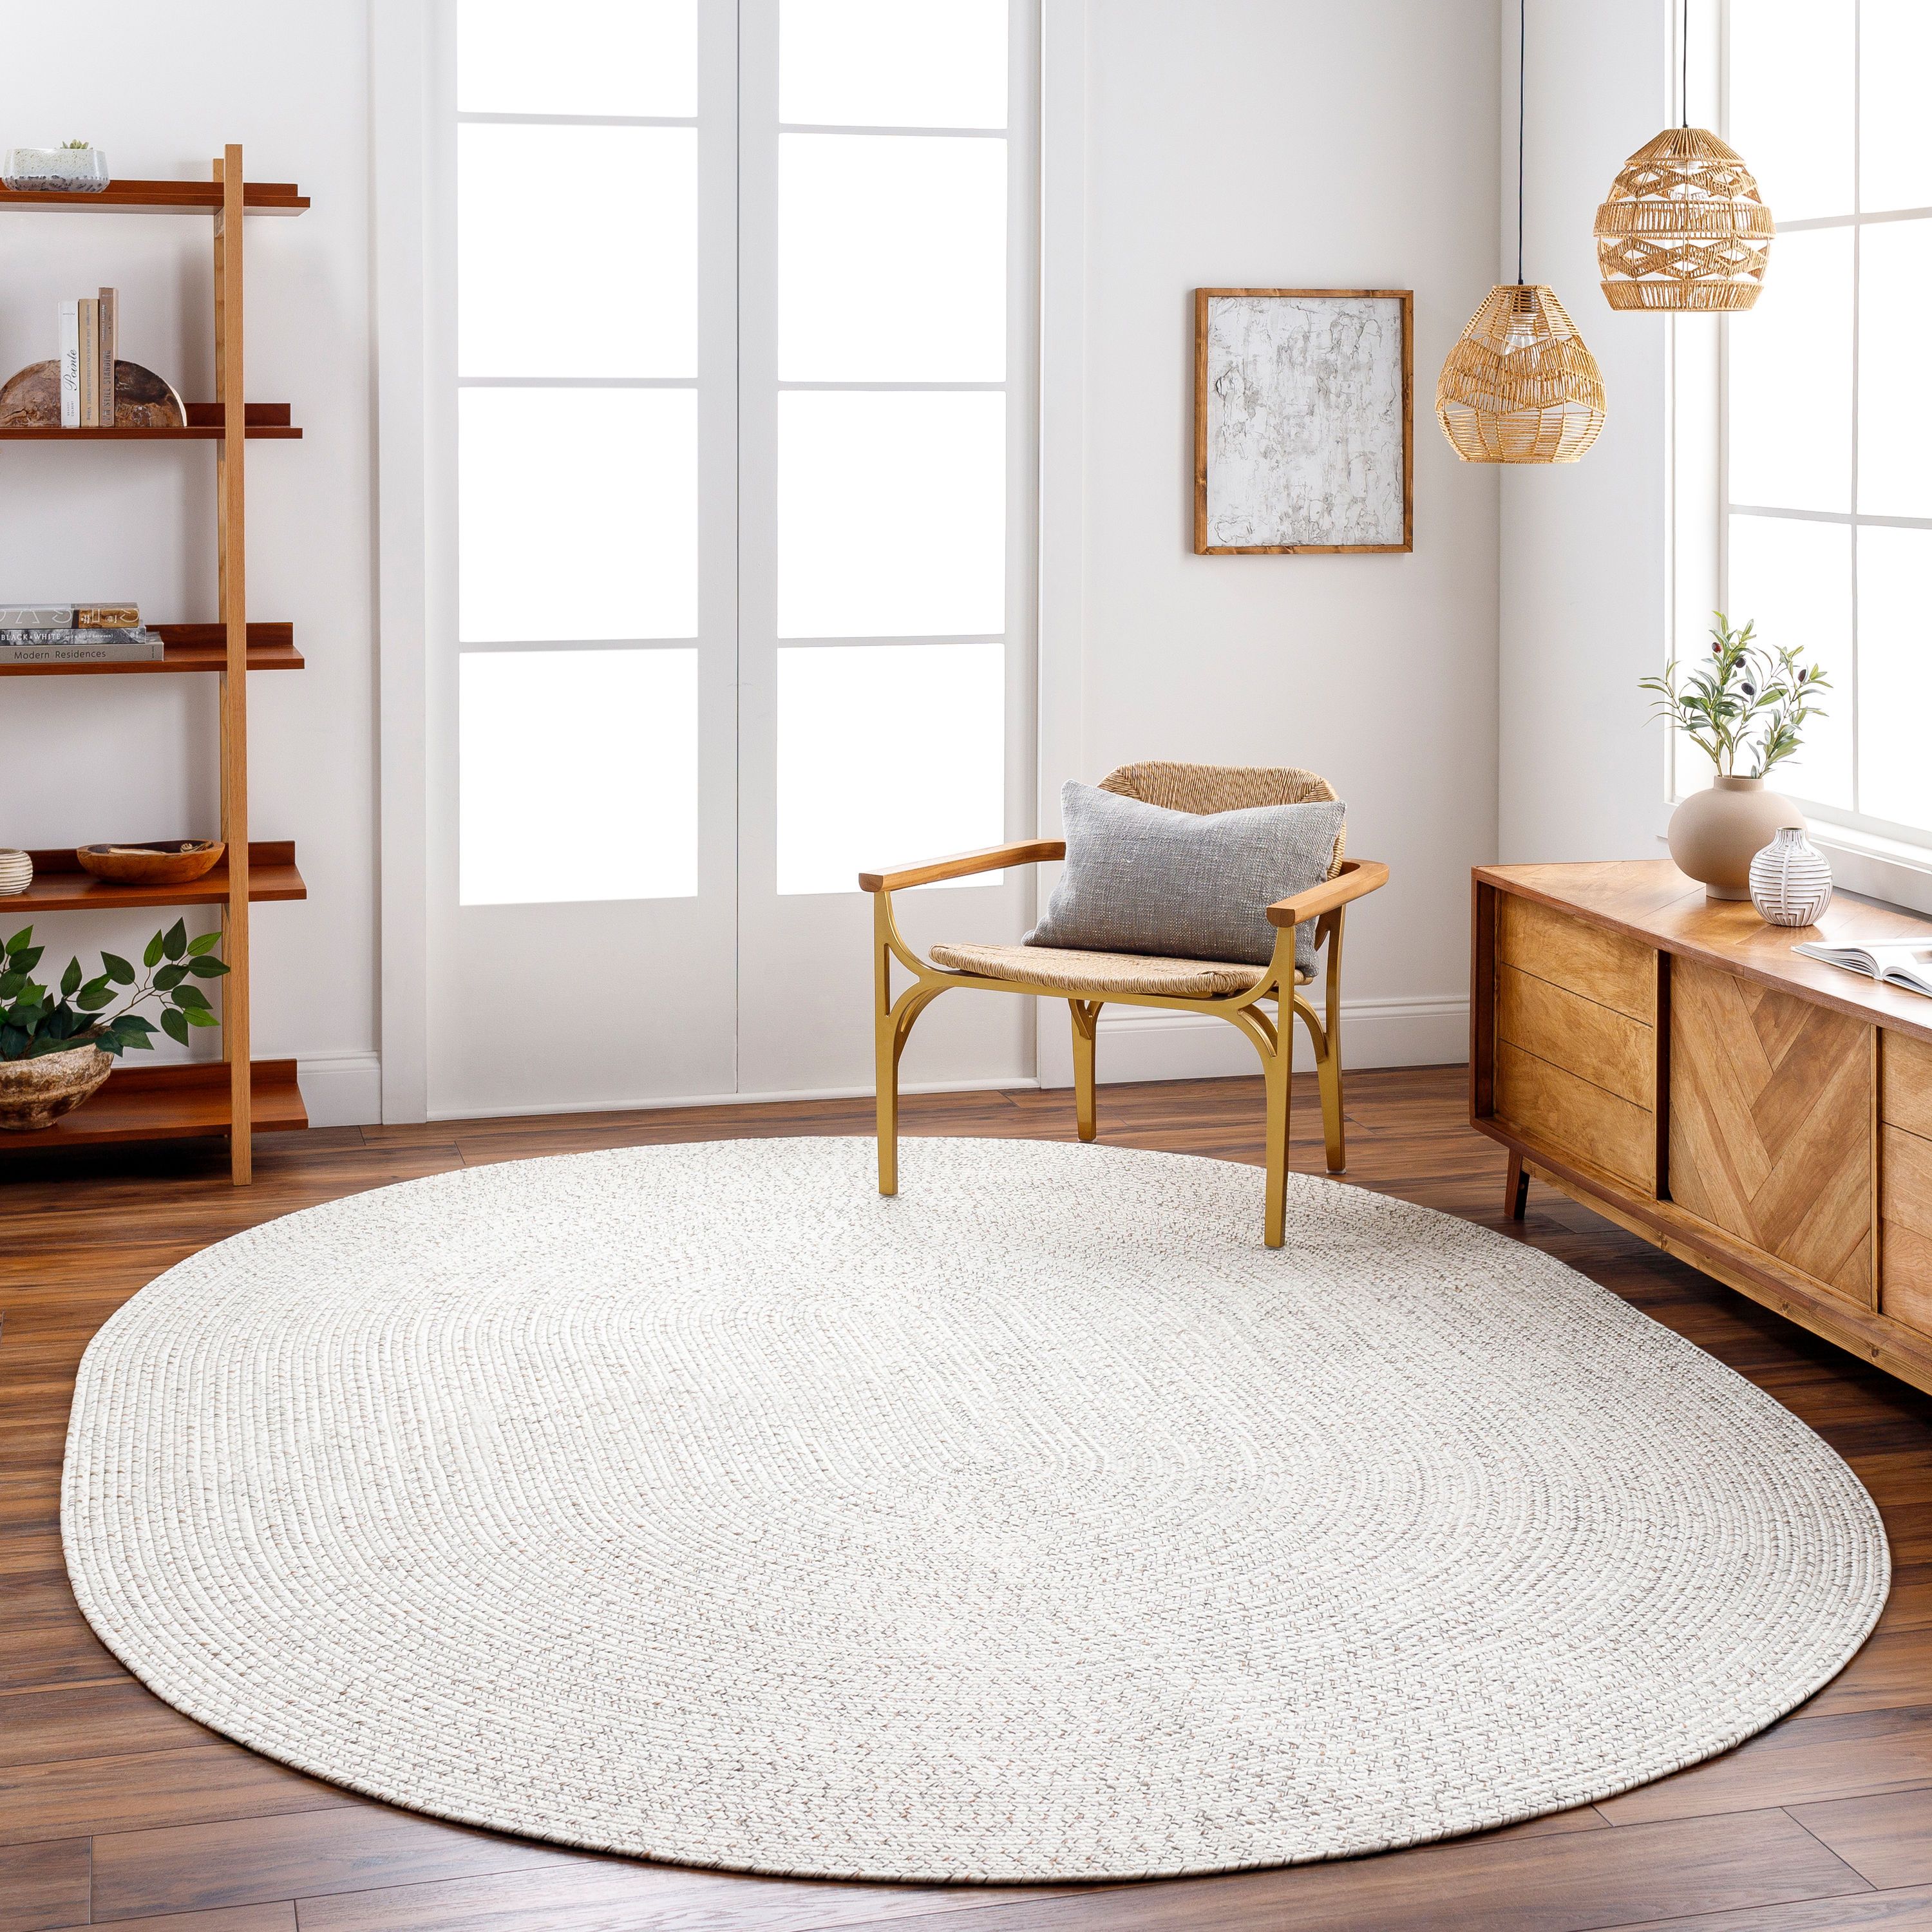 Oval Rugs At Lowes With Timeless Oval Rugs (View 10 of 15)